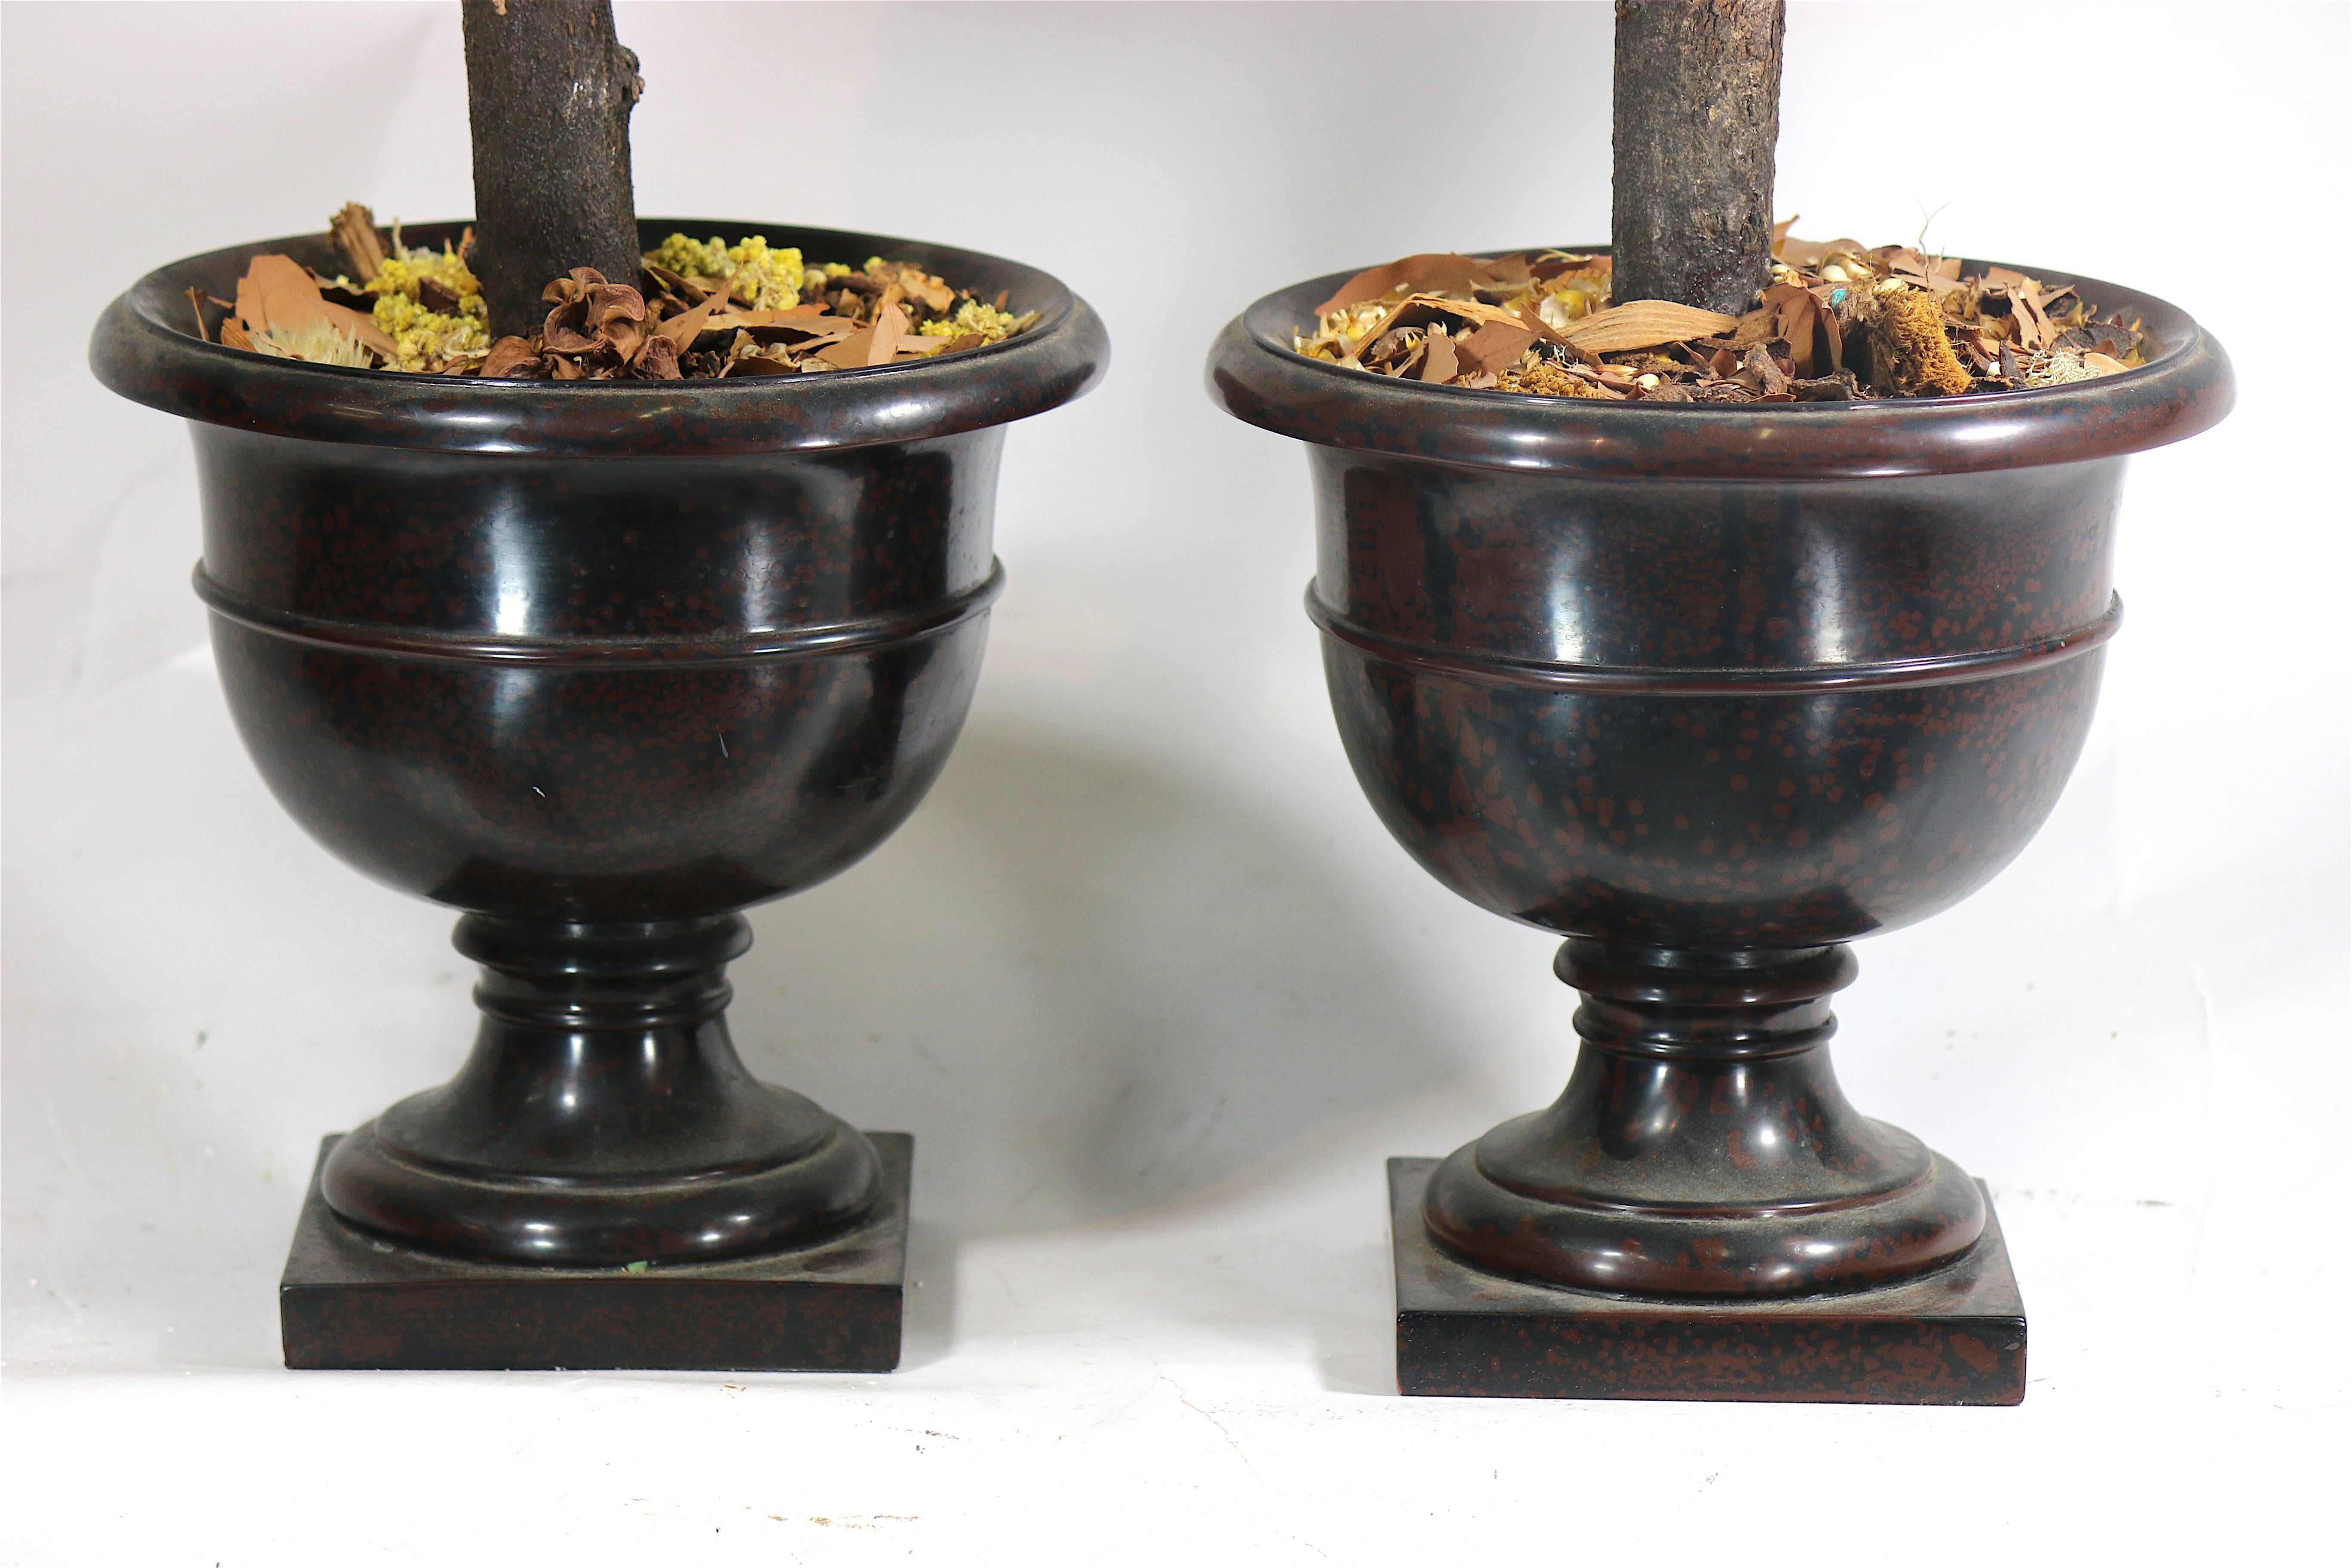 Decoratively alluring pair of topiaries in Mid-Century well turned resin urns.
Embellishment such as flowers can be added to the moss or a new topper can be added-see in situ photo on dining table.
Measures: 9  1/2